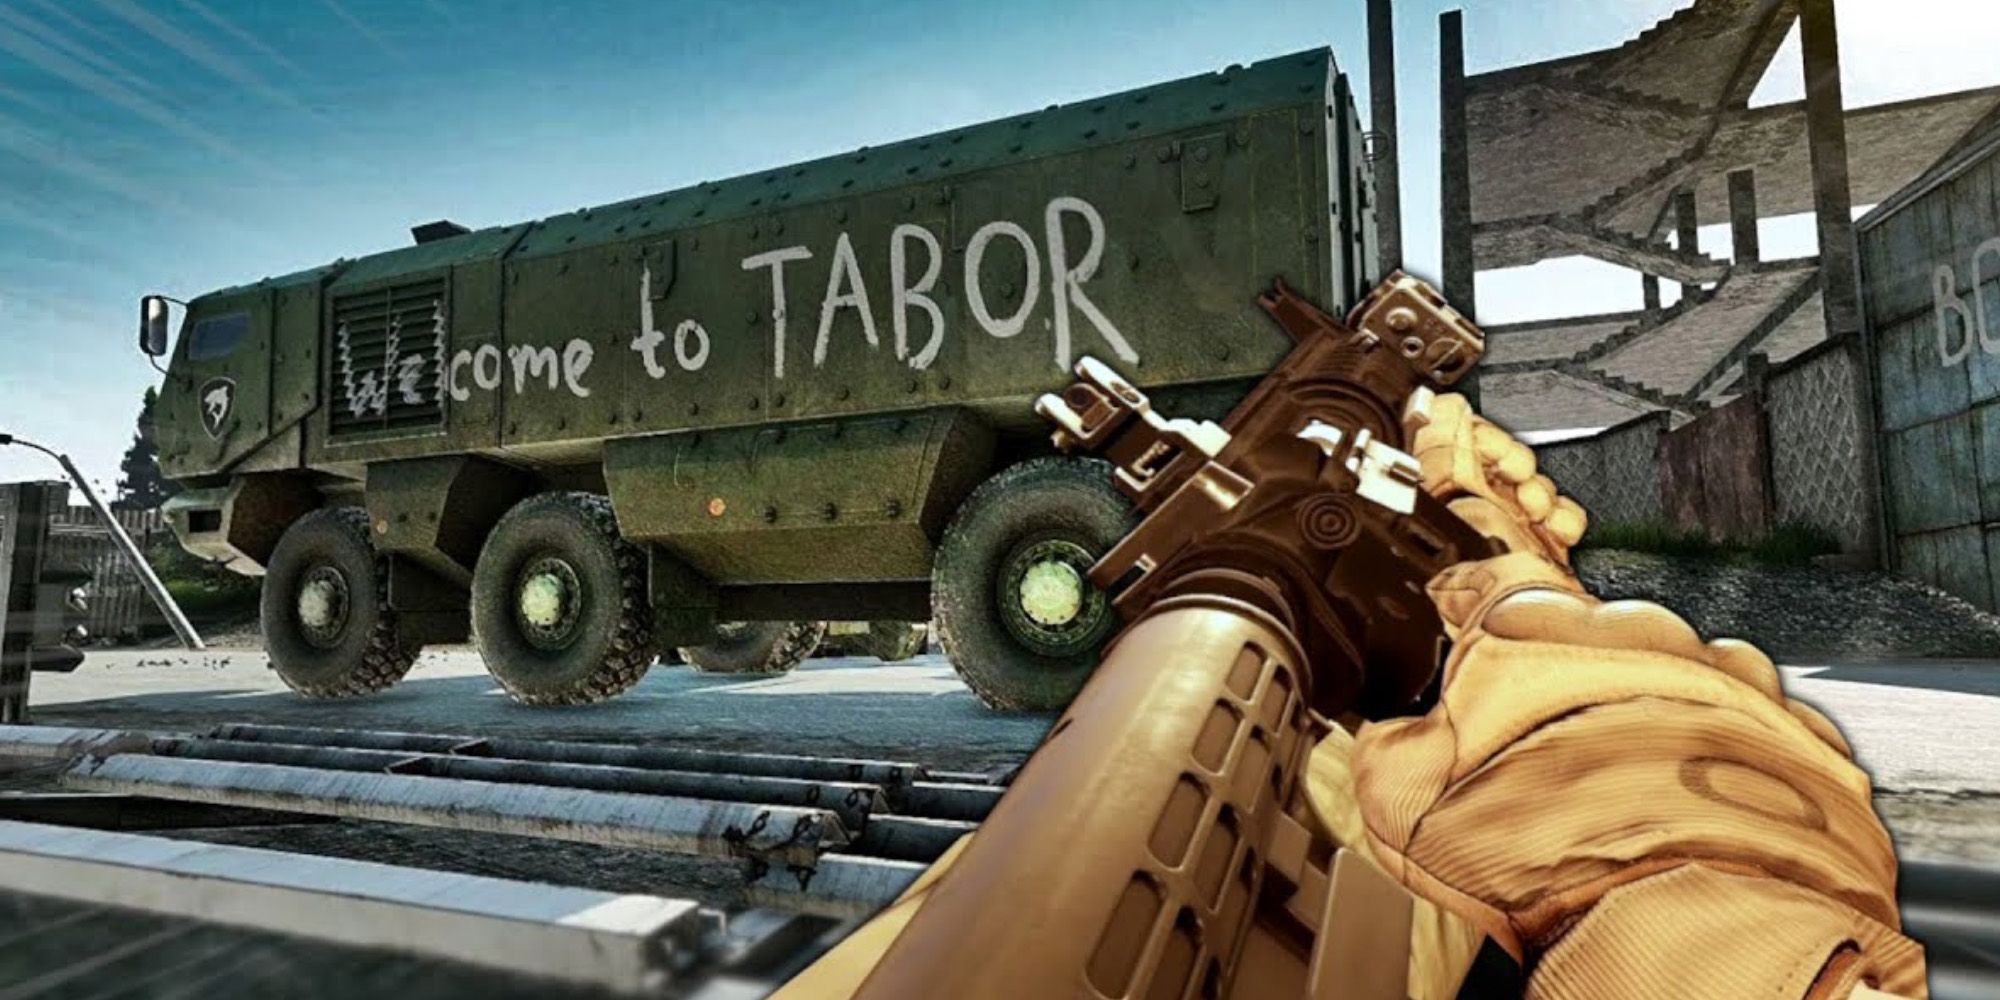 ghosts of tabor VR escape to tarkov lookalike